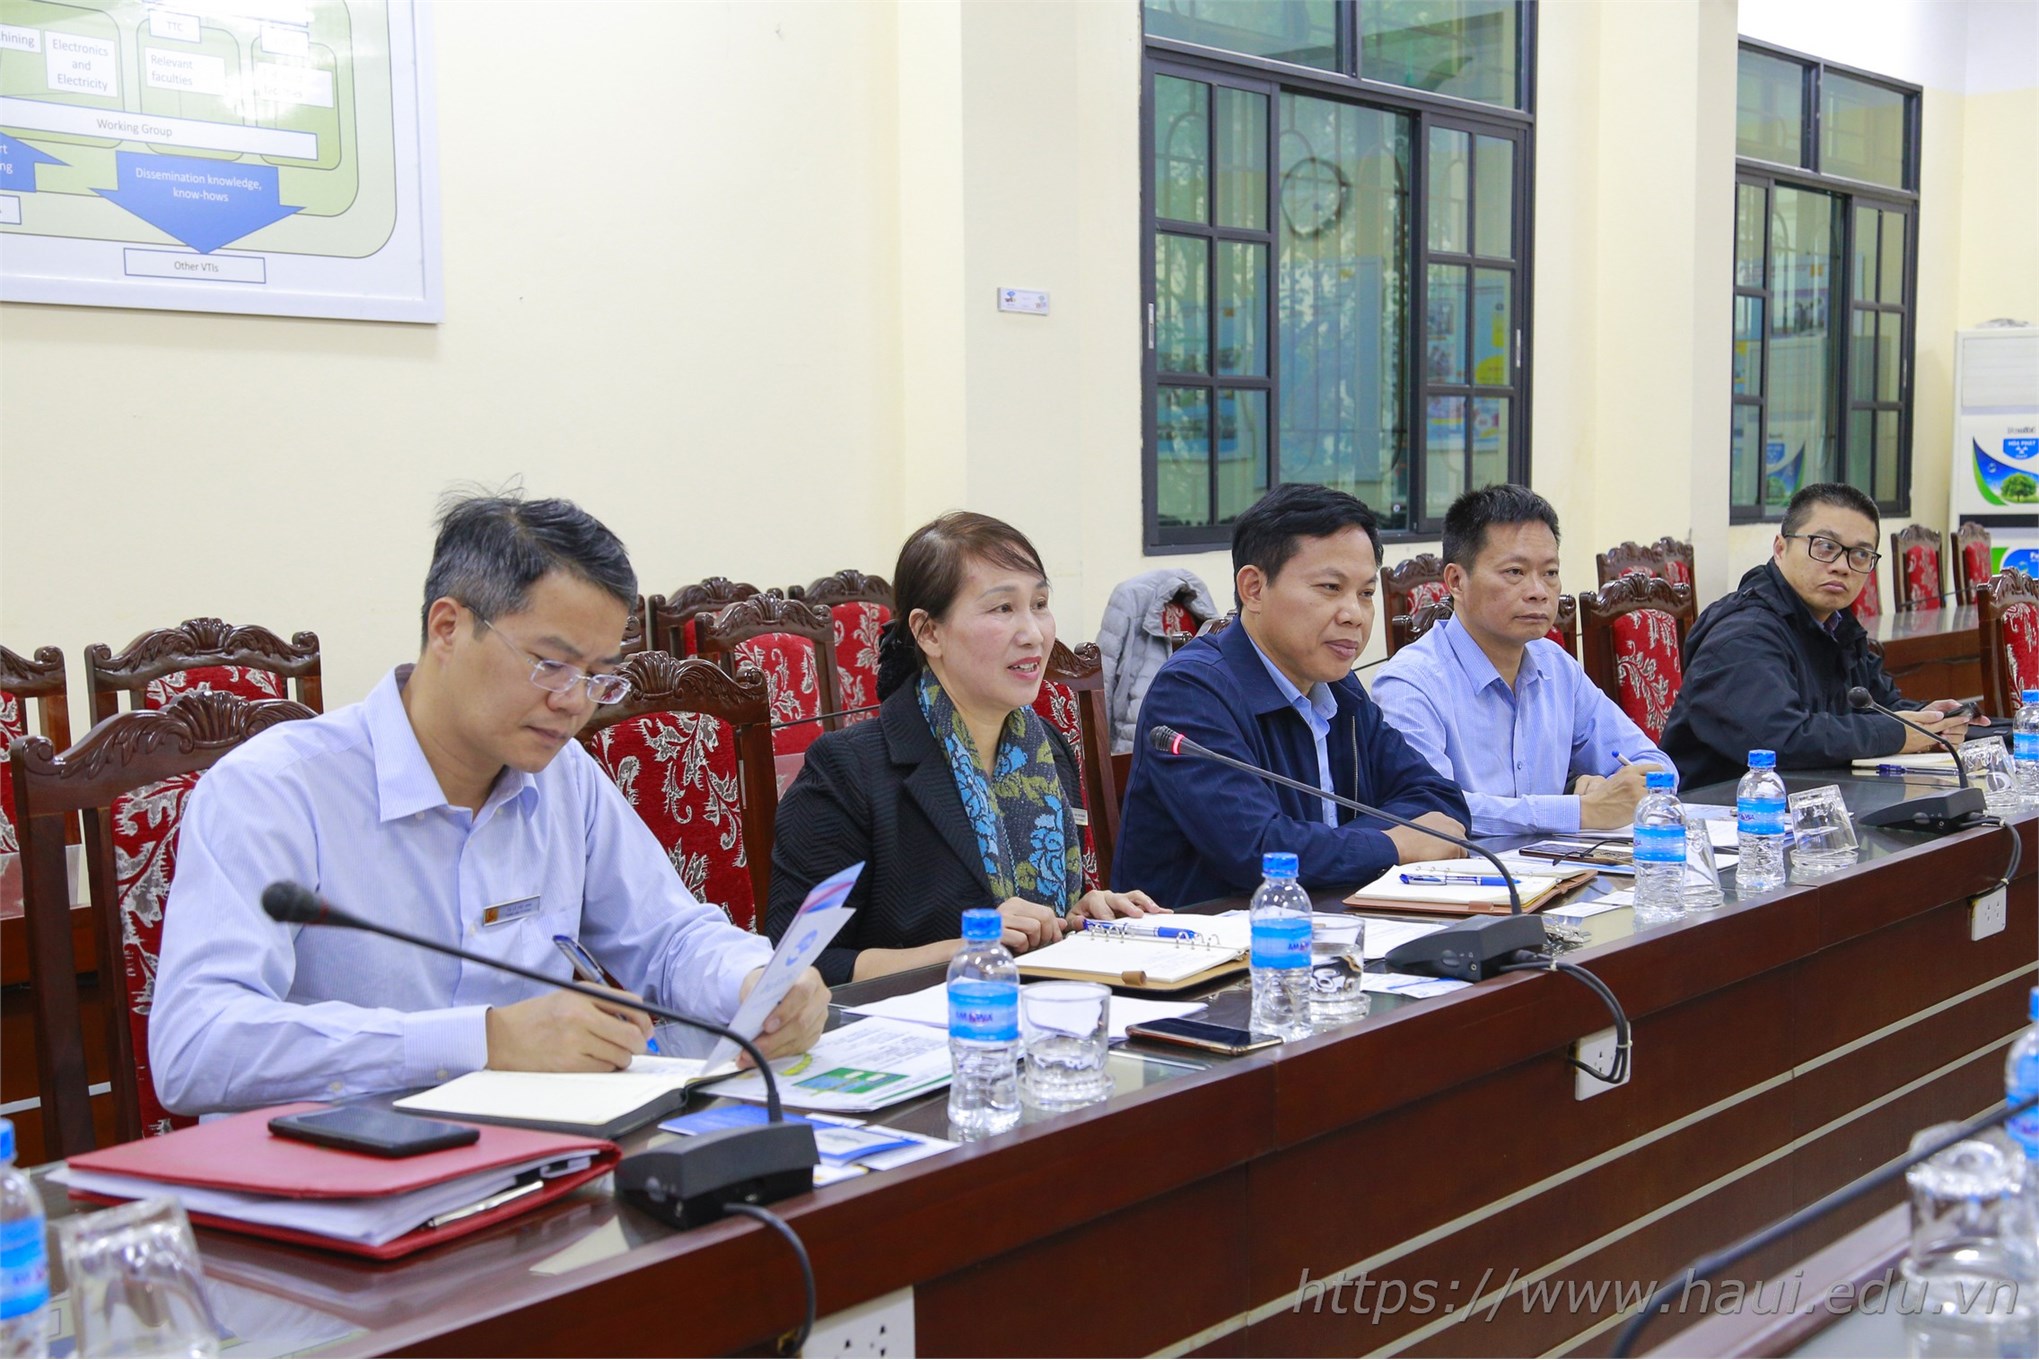 Hanoi University of Industry welcomes a delegation from Aomori prefectural government, Japan